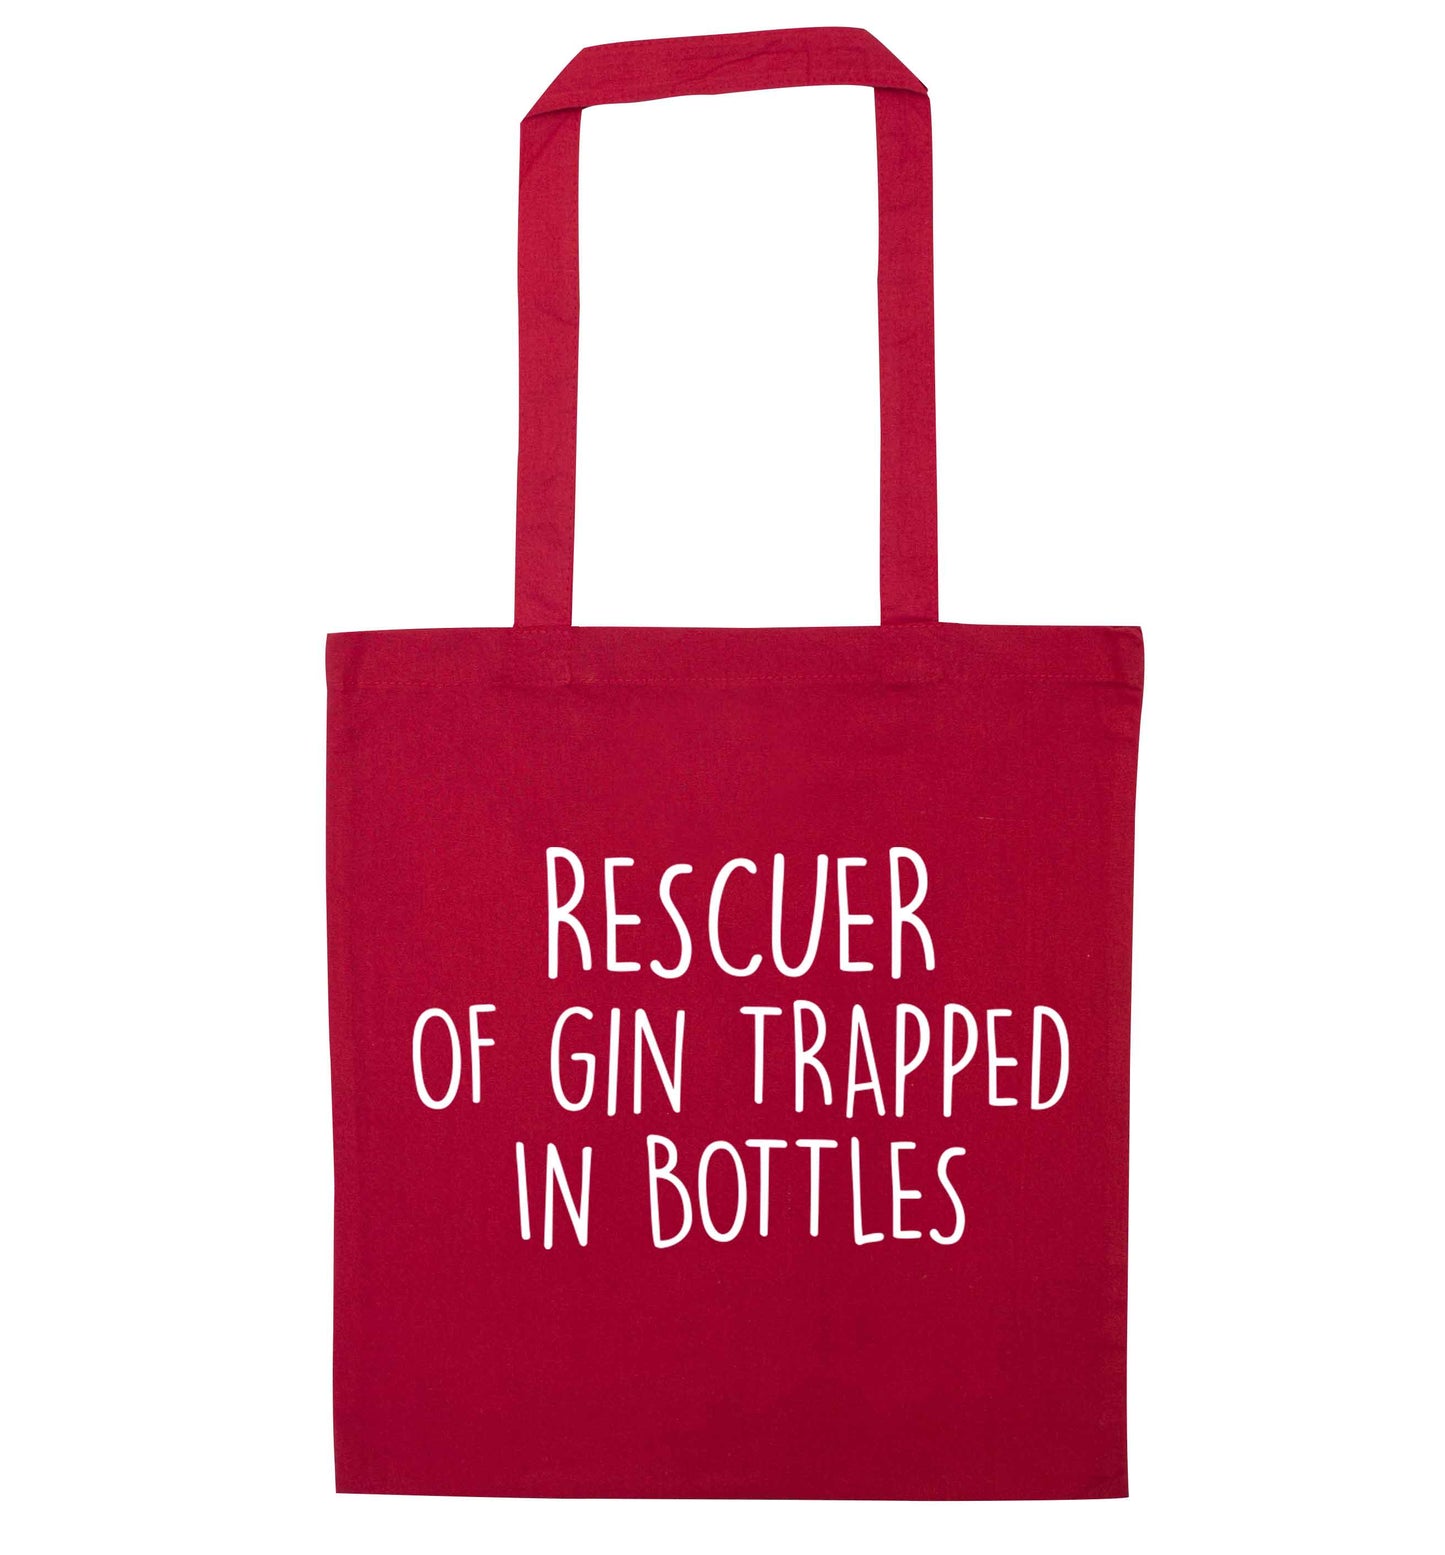 Rescuer of gin trapped in bottles red tote bag